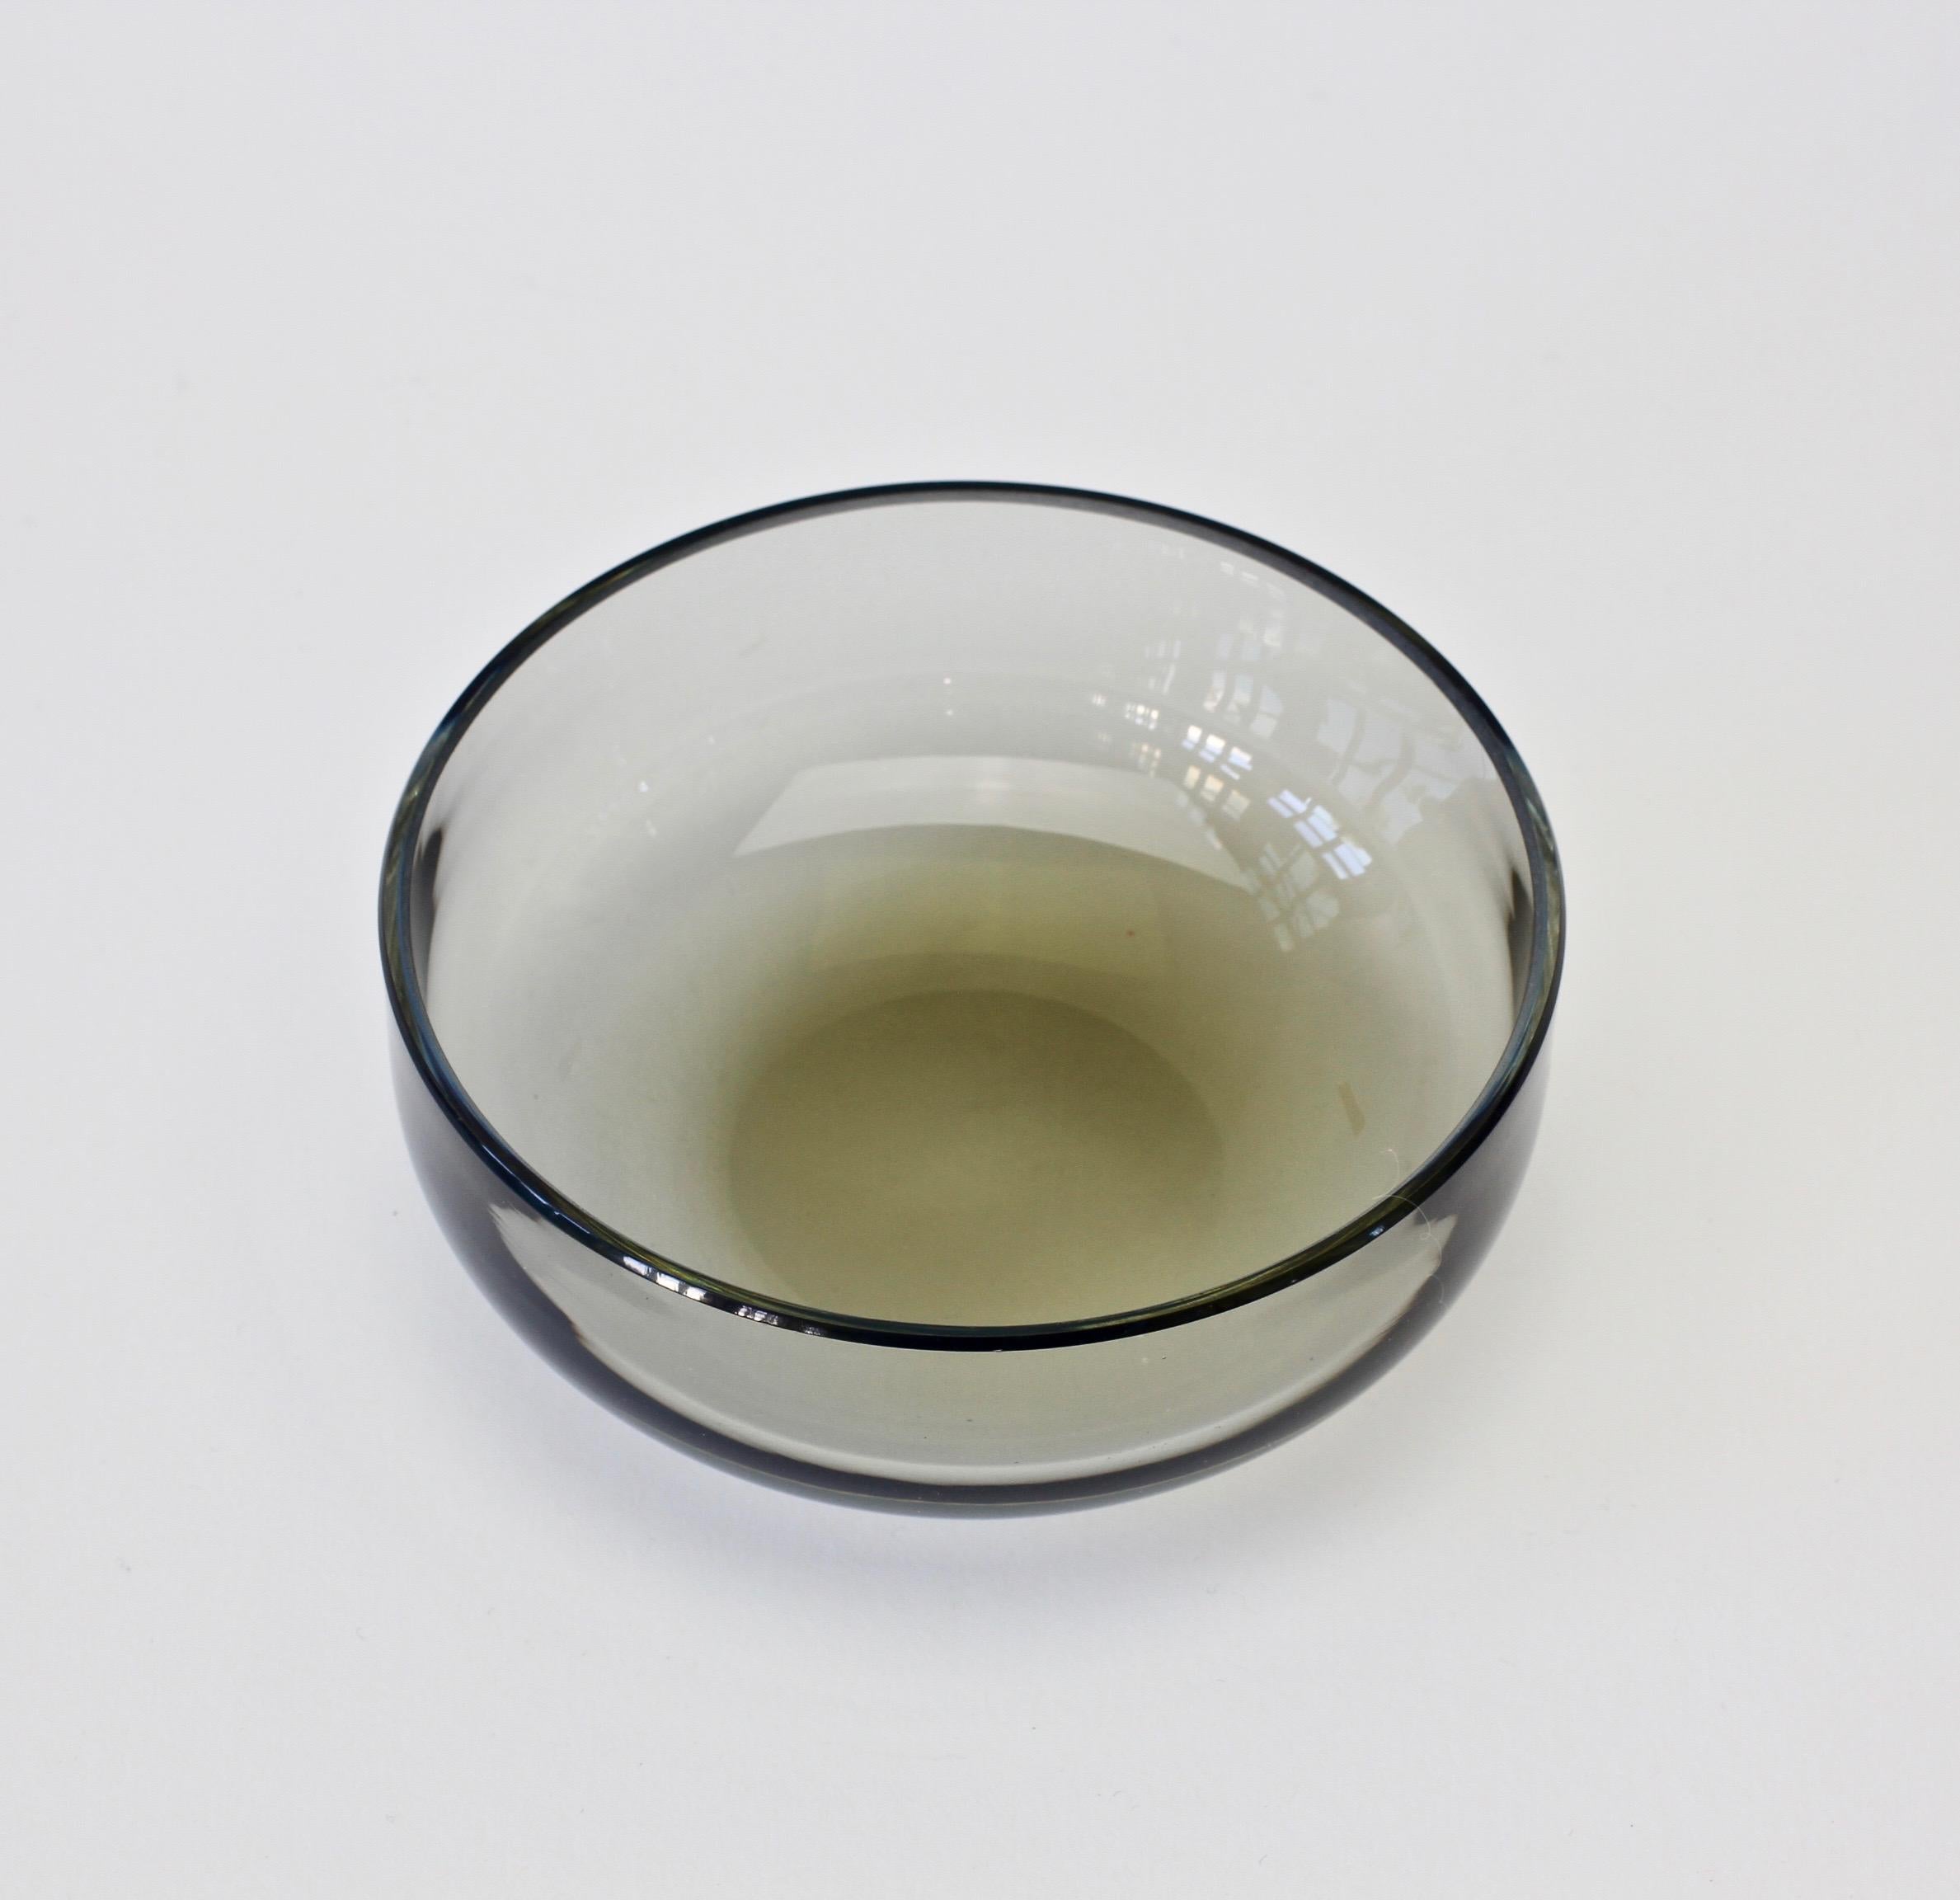 Single midcentury, vintage Murano glass bowl designed by Antonio da Ros (1936-2012) for Cenedese, circa 1970-1990. Wonderful translucent color of smoked gray (grey) toned glass. Simplistic yet elegant form - almost futuristic. A very beautiful small